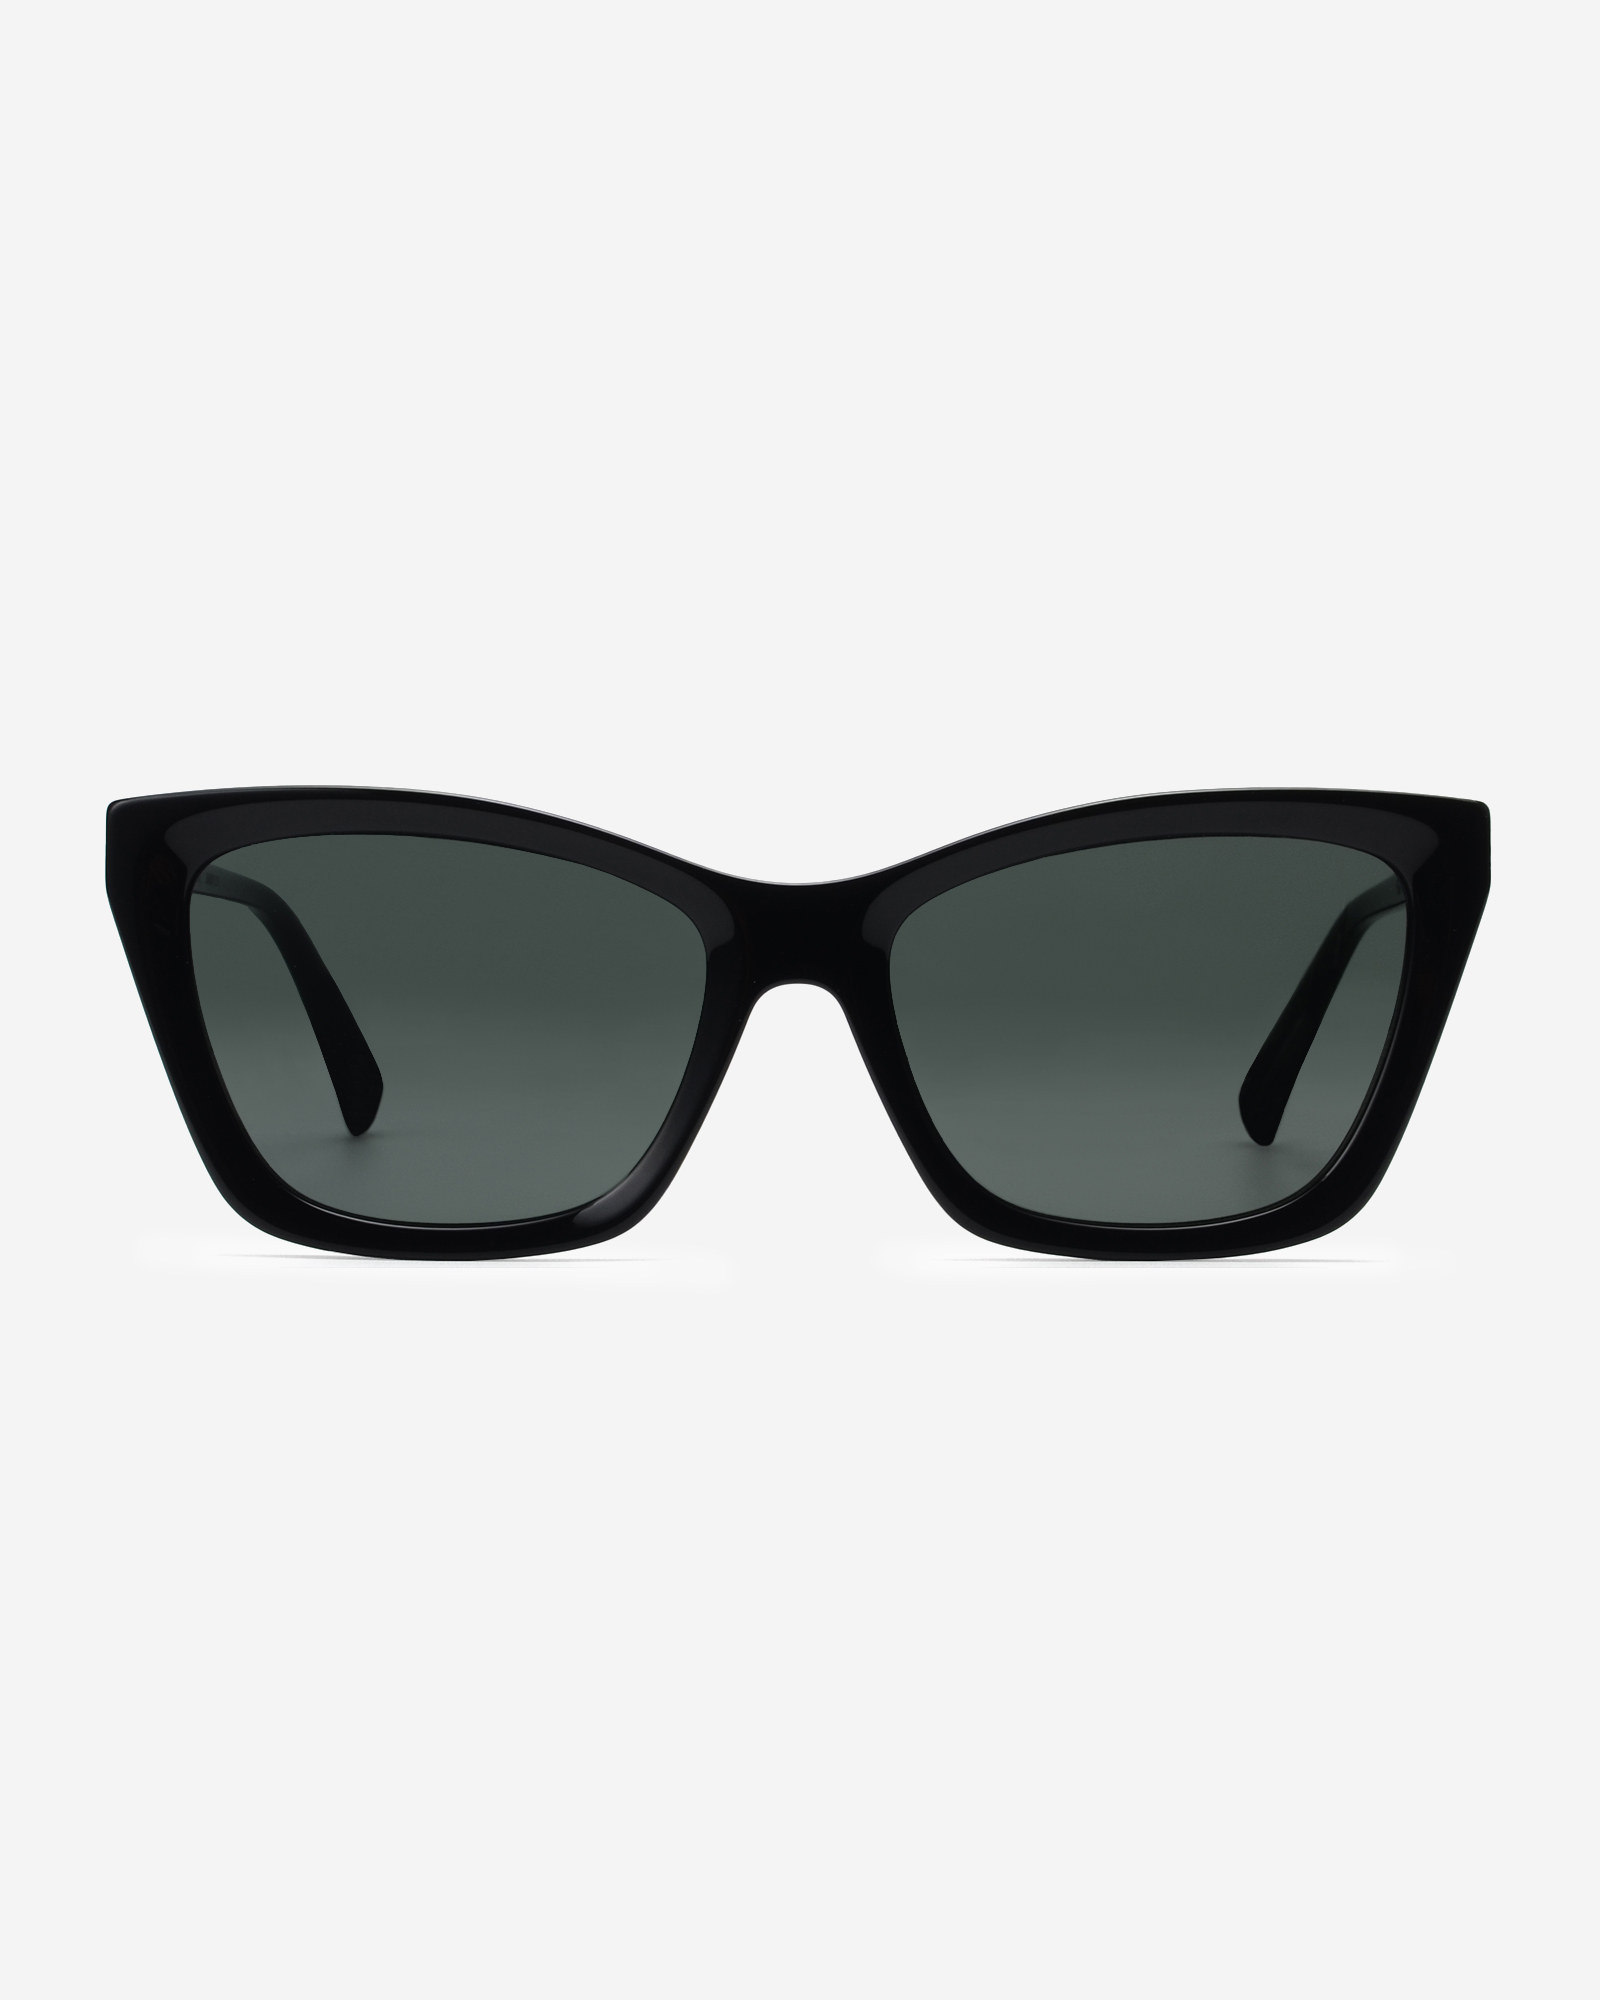  Cat-eye sunglasses with Acetate frame 